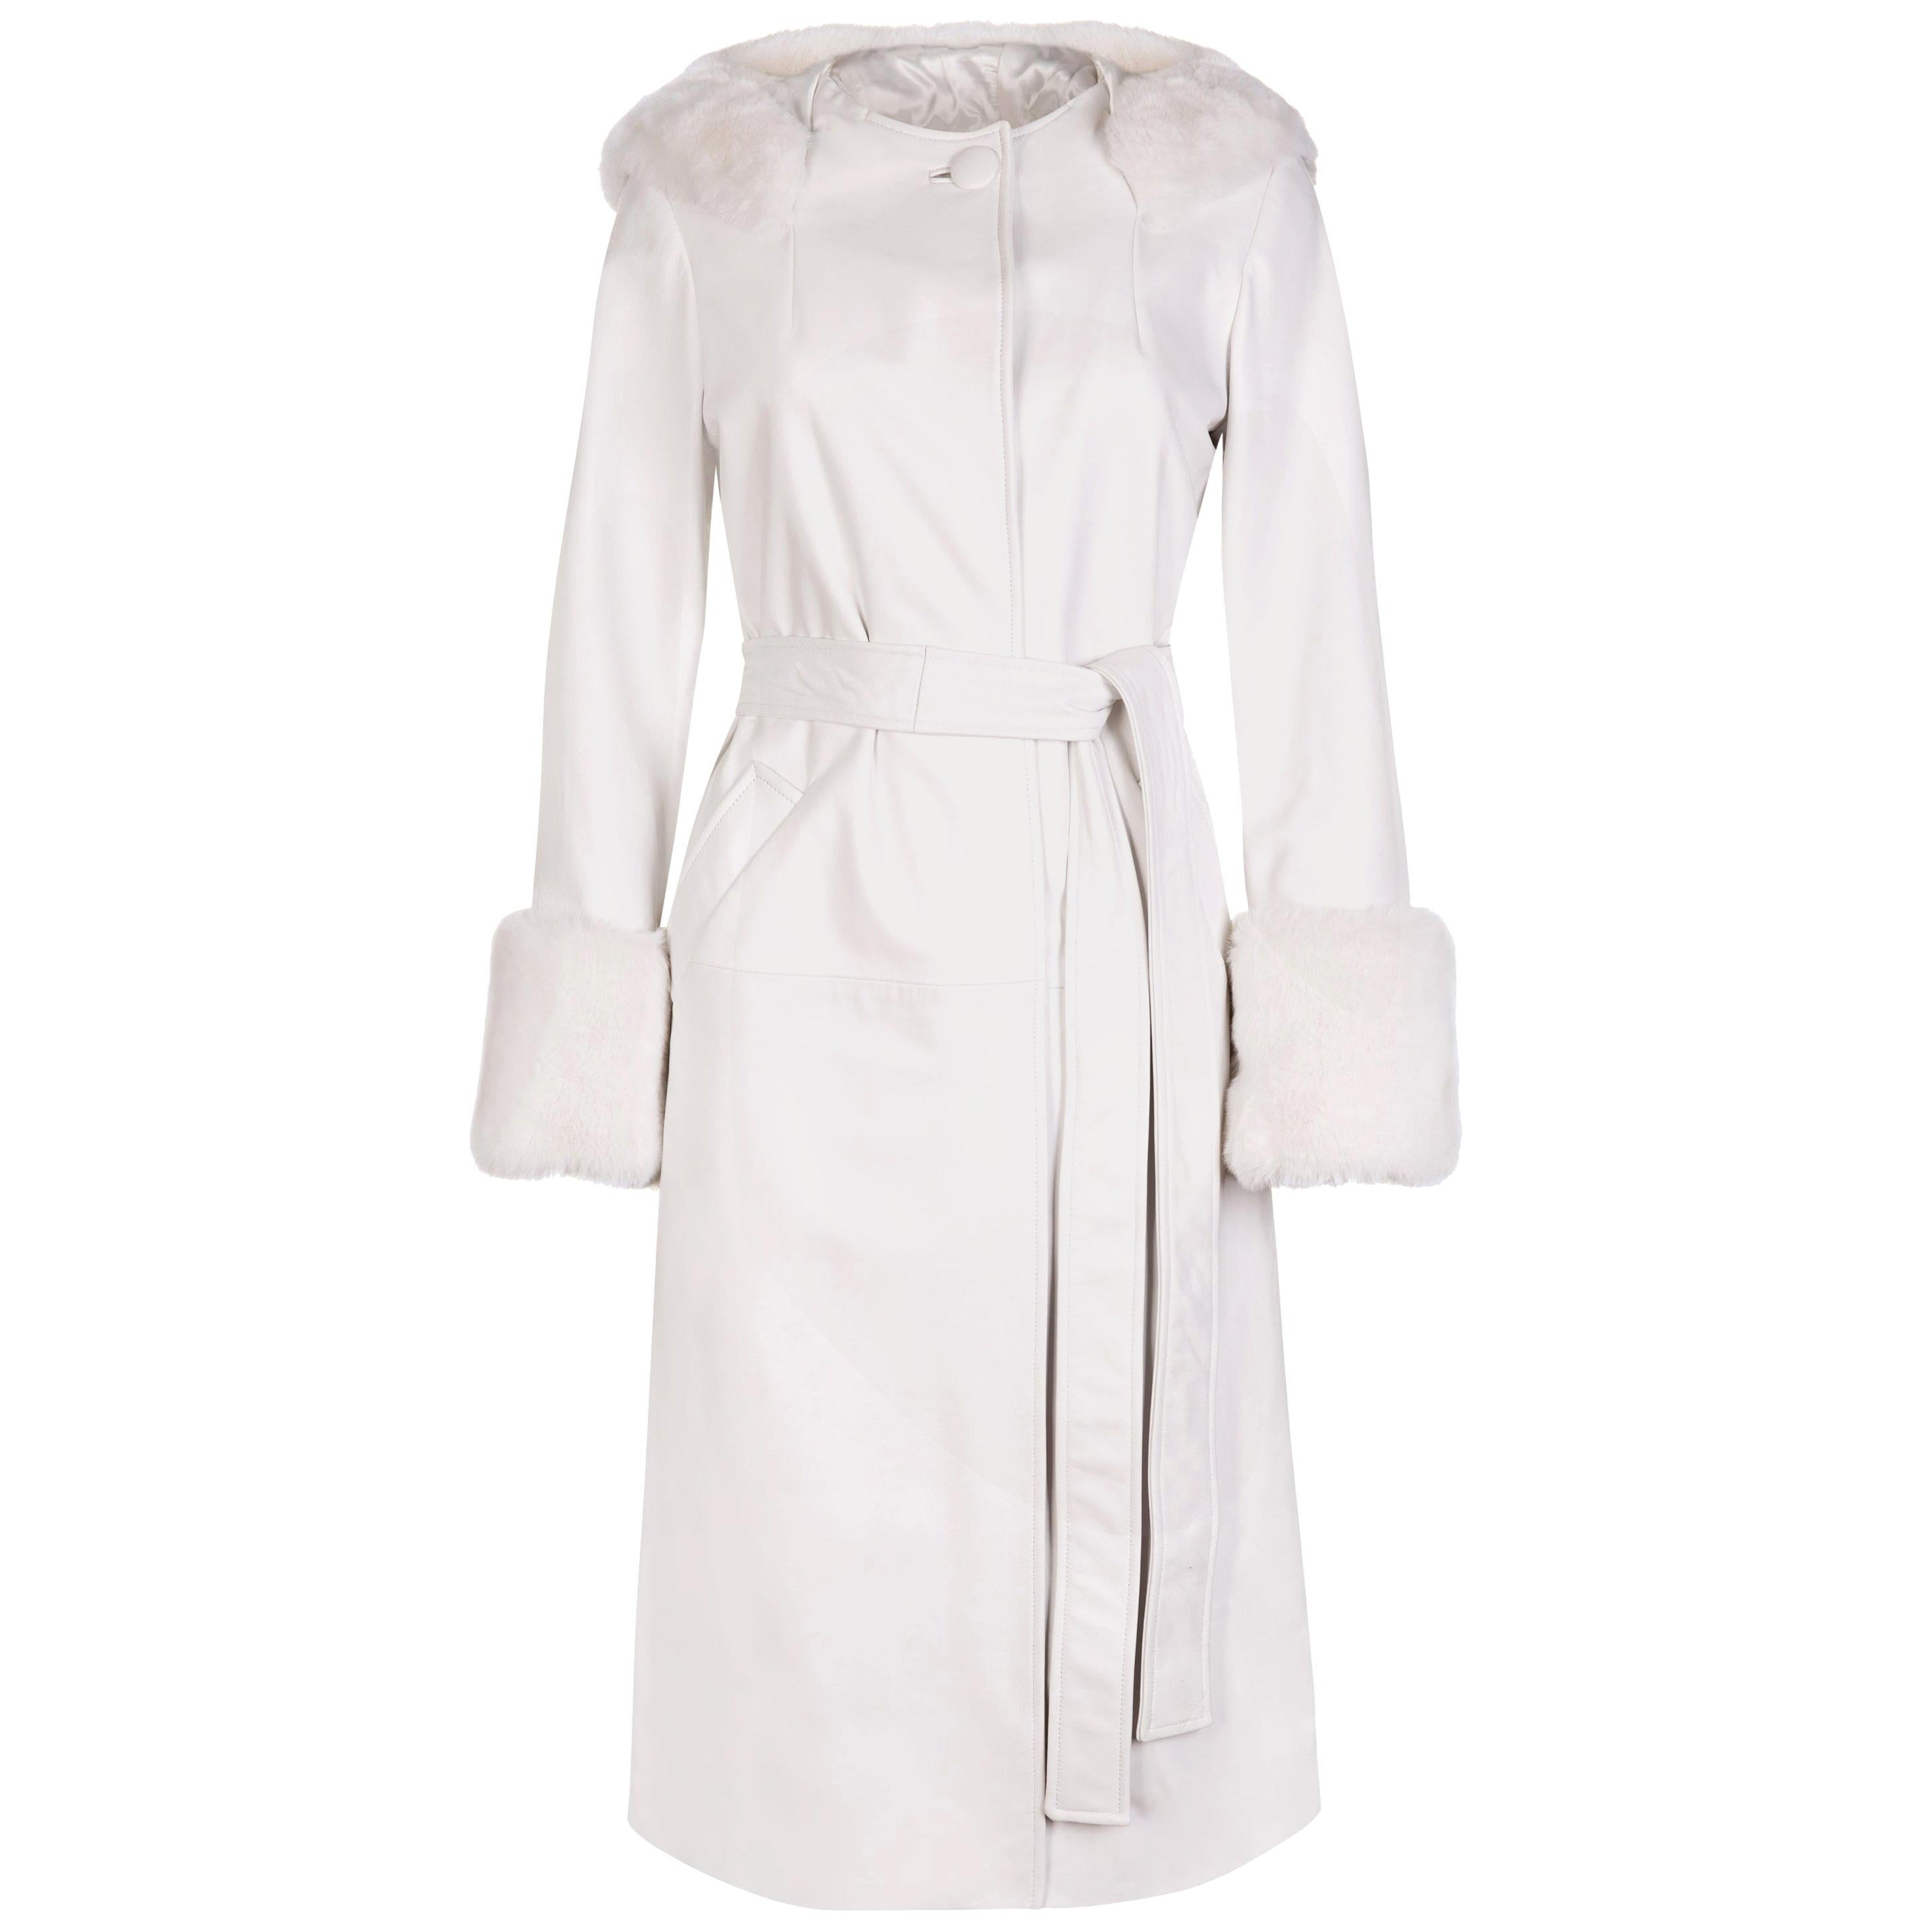 Verheyen London Hooded Leather Trench Coat in White with Faux Fur - Size uk 8

Handmade in London, made with 100% Italian Lambs Leather and the highest quality of faux fur to match, this luxury item is an investment piece to wear for a lifetime. 